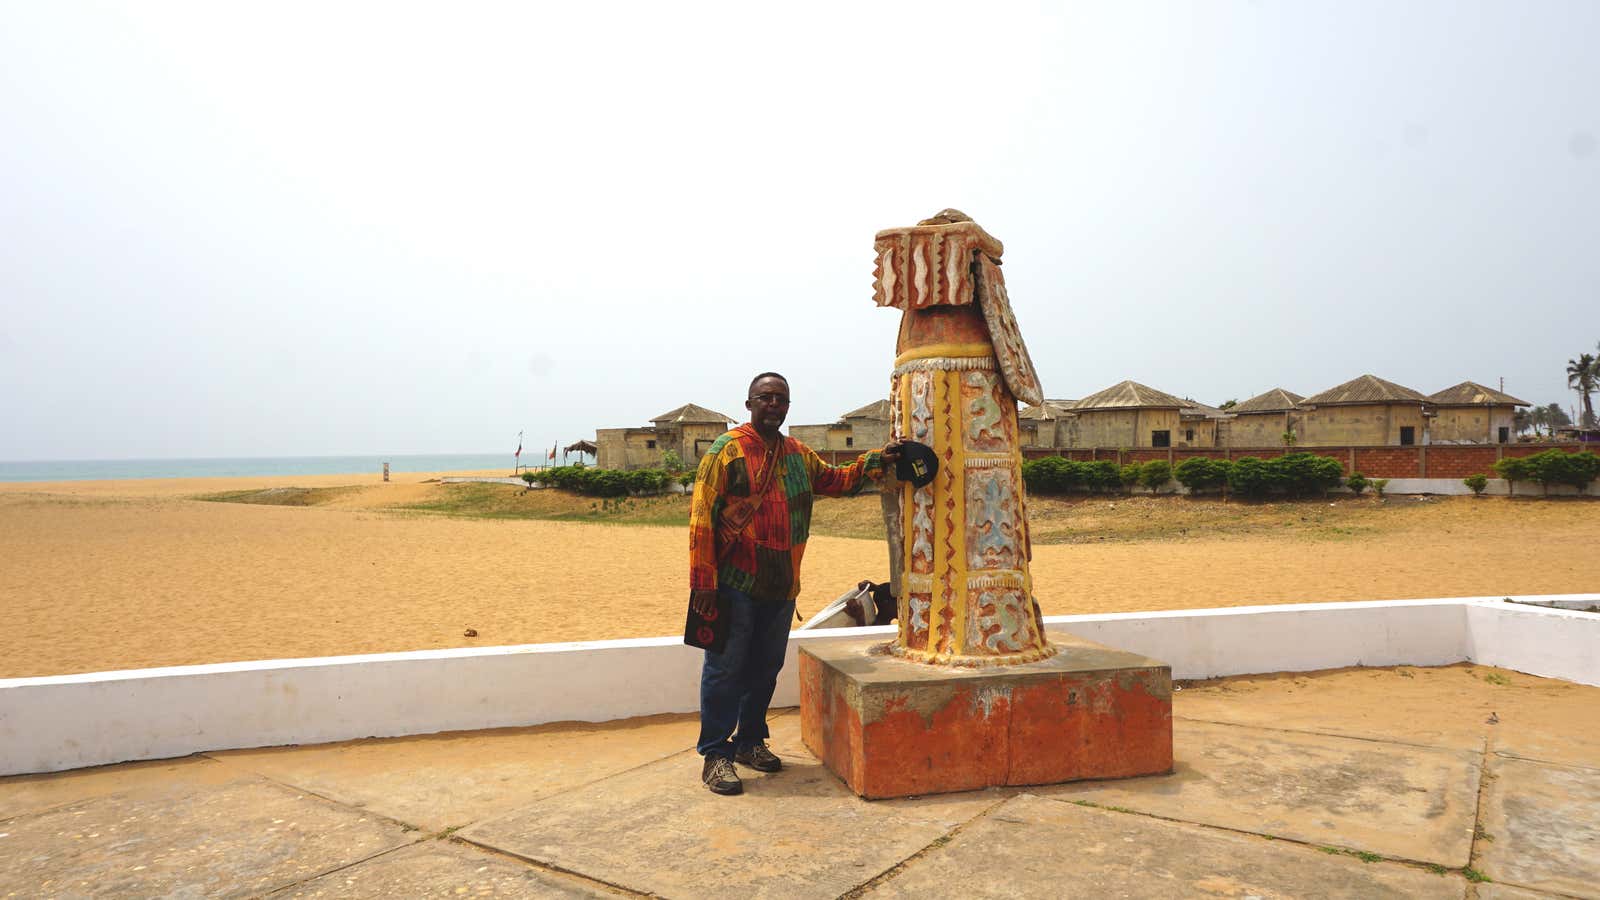 “Cosmo Kenton a Prince Hall Mason from North Carolina near a sculpture at The Port of No Return in Ouidah.”